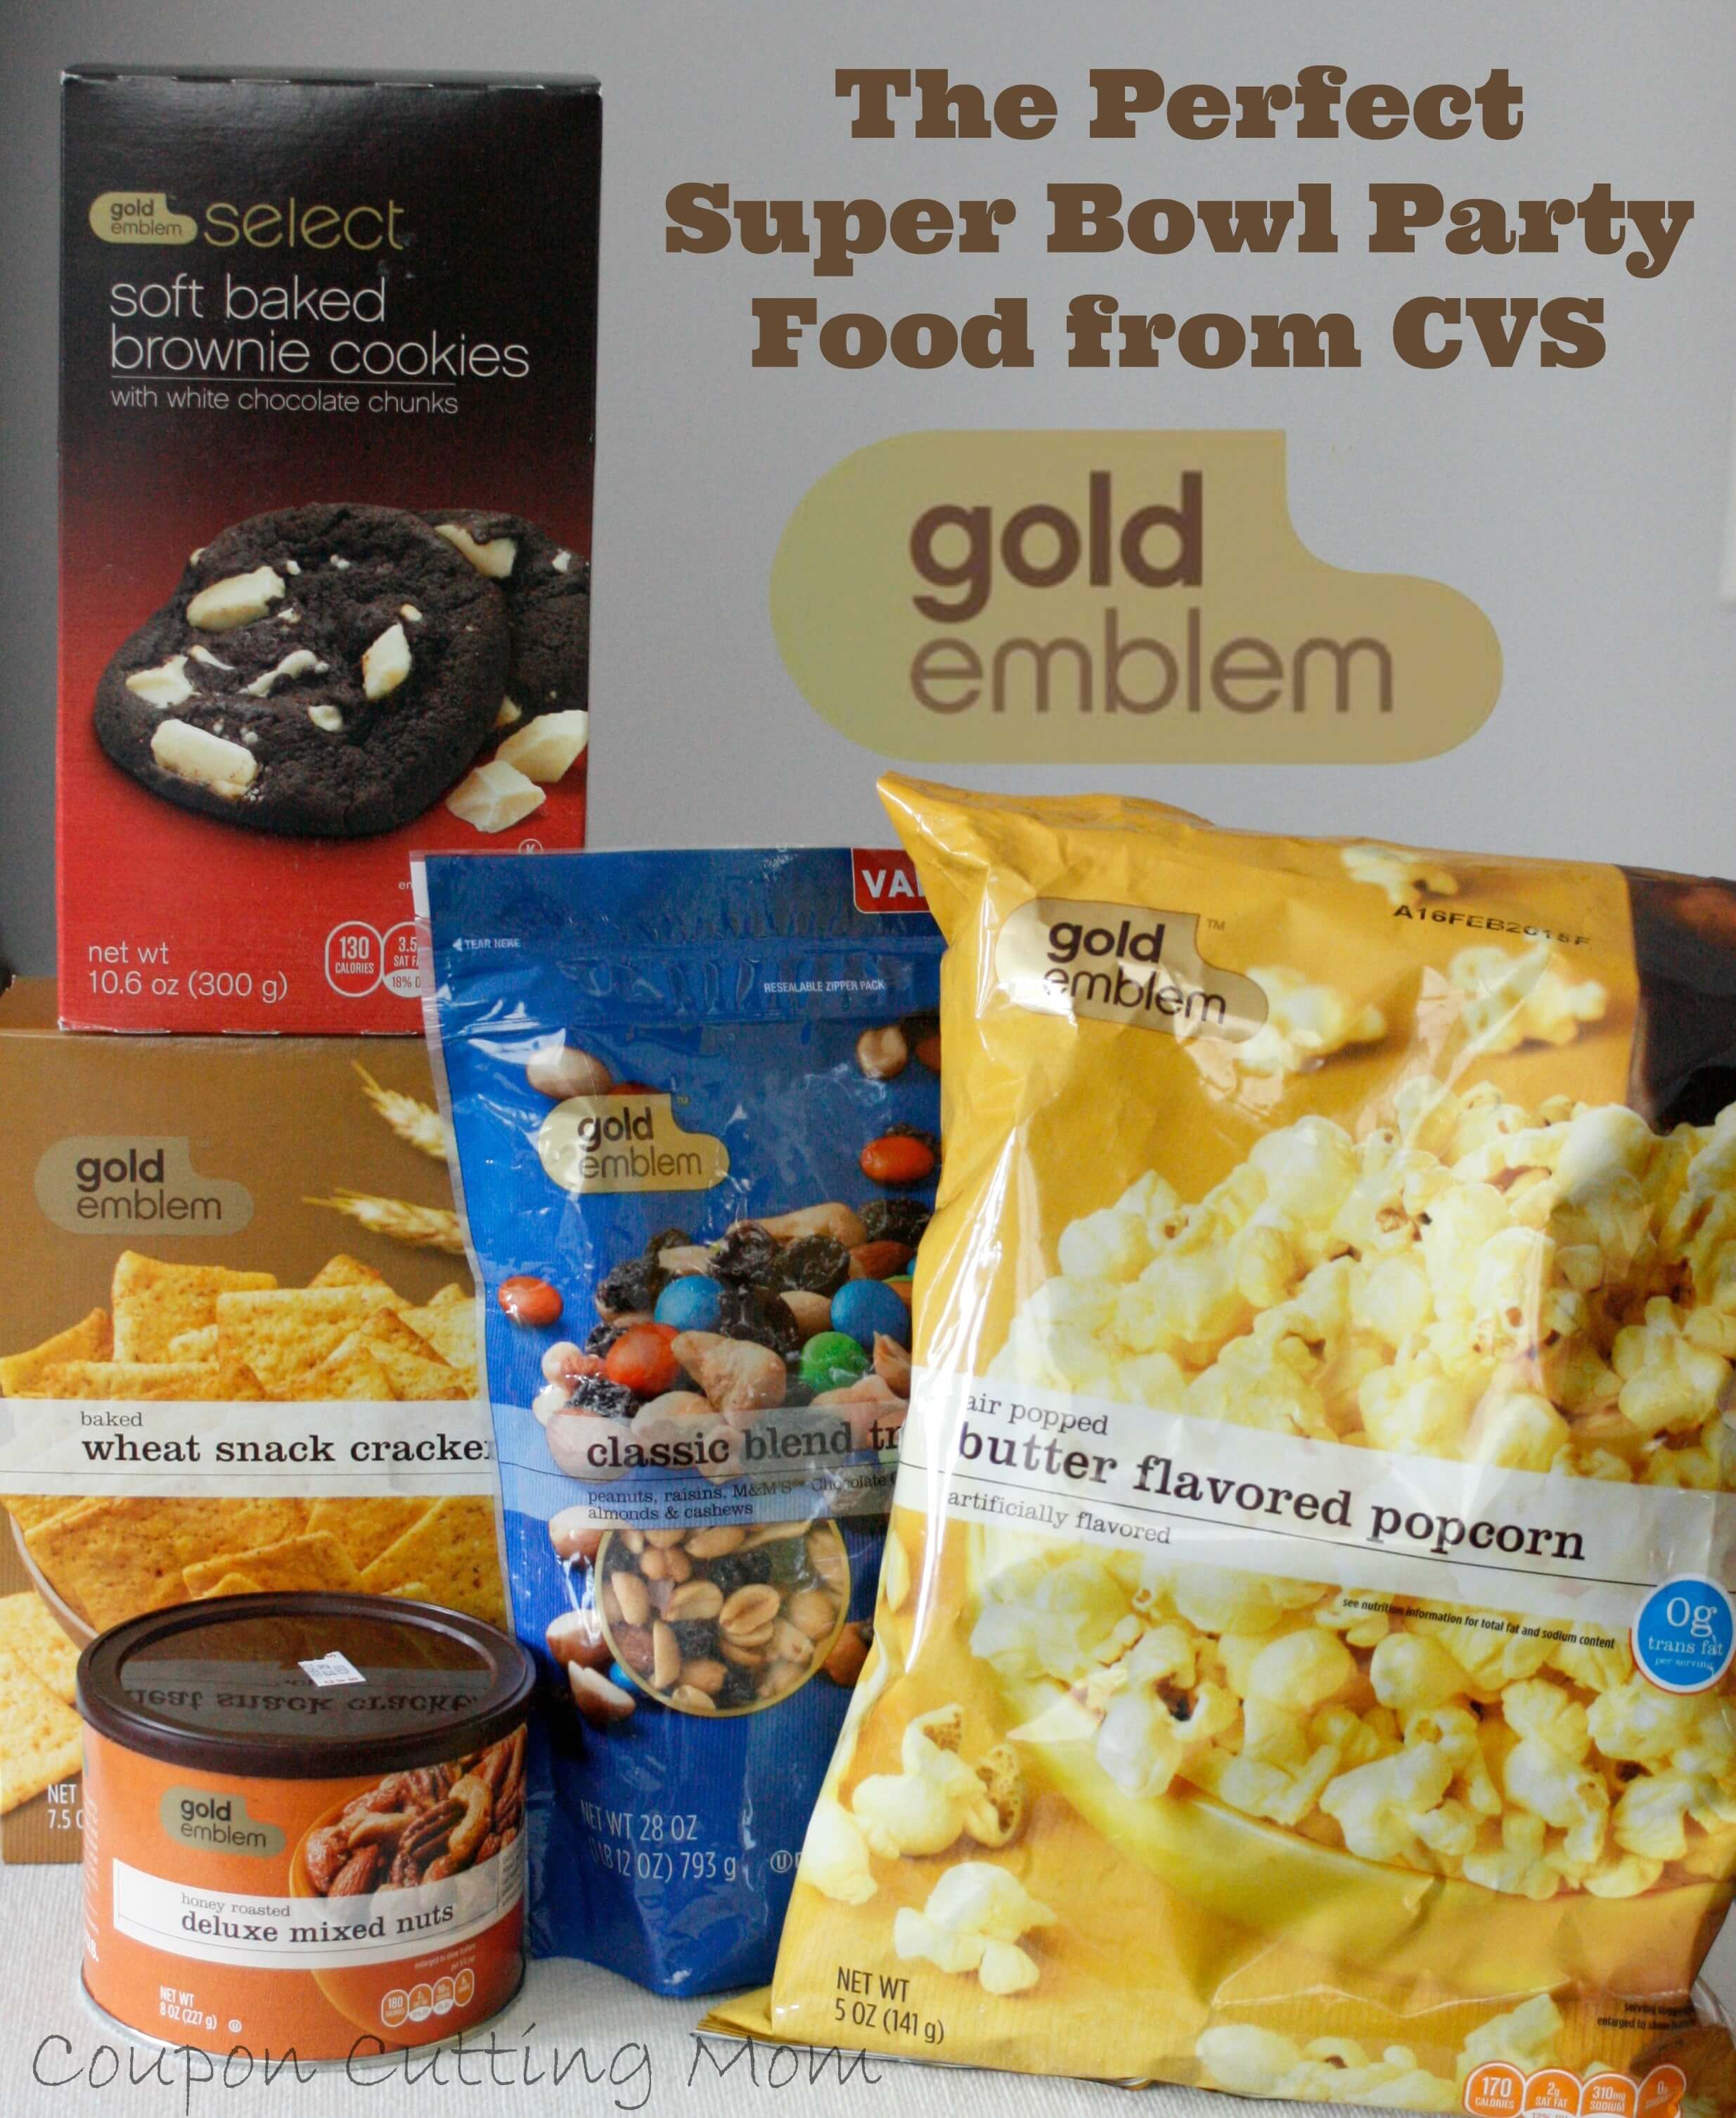 Gold Emblem Snacks From CVS Are the Perfect Game Day Food #SuperBowl2015